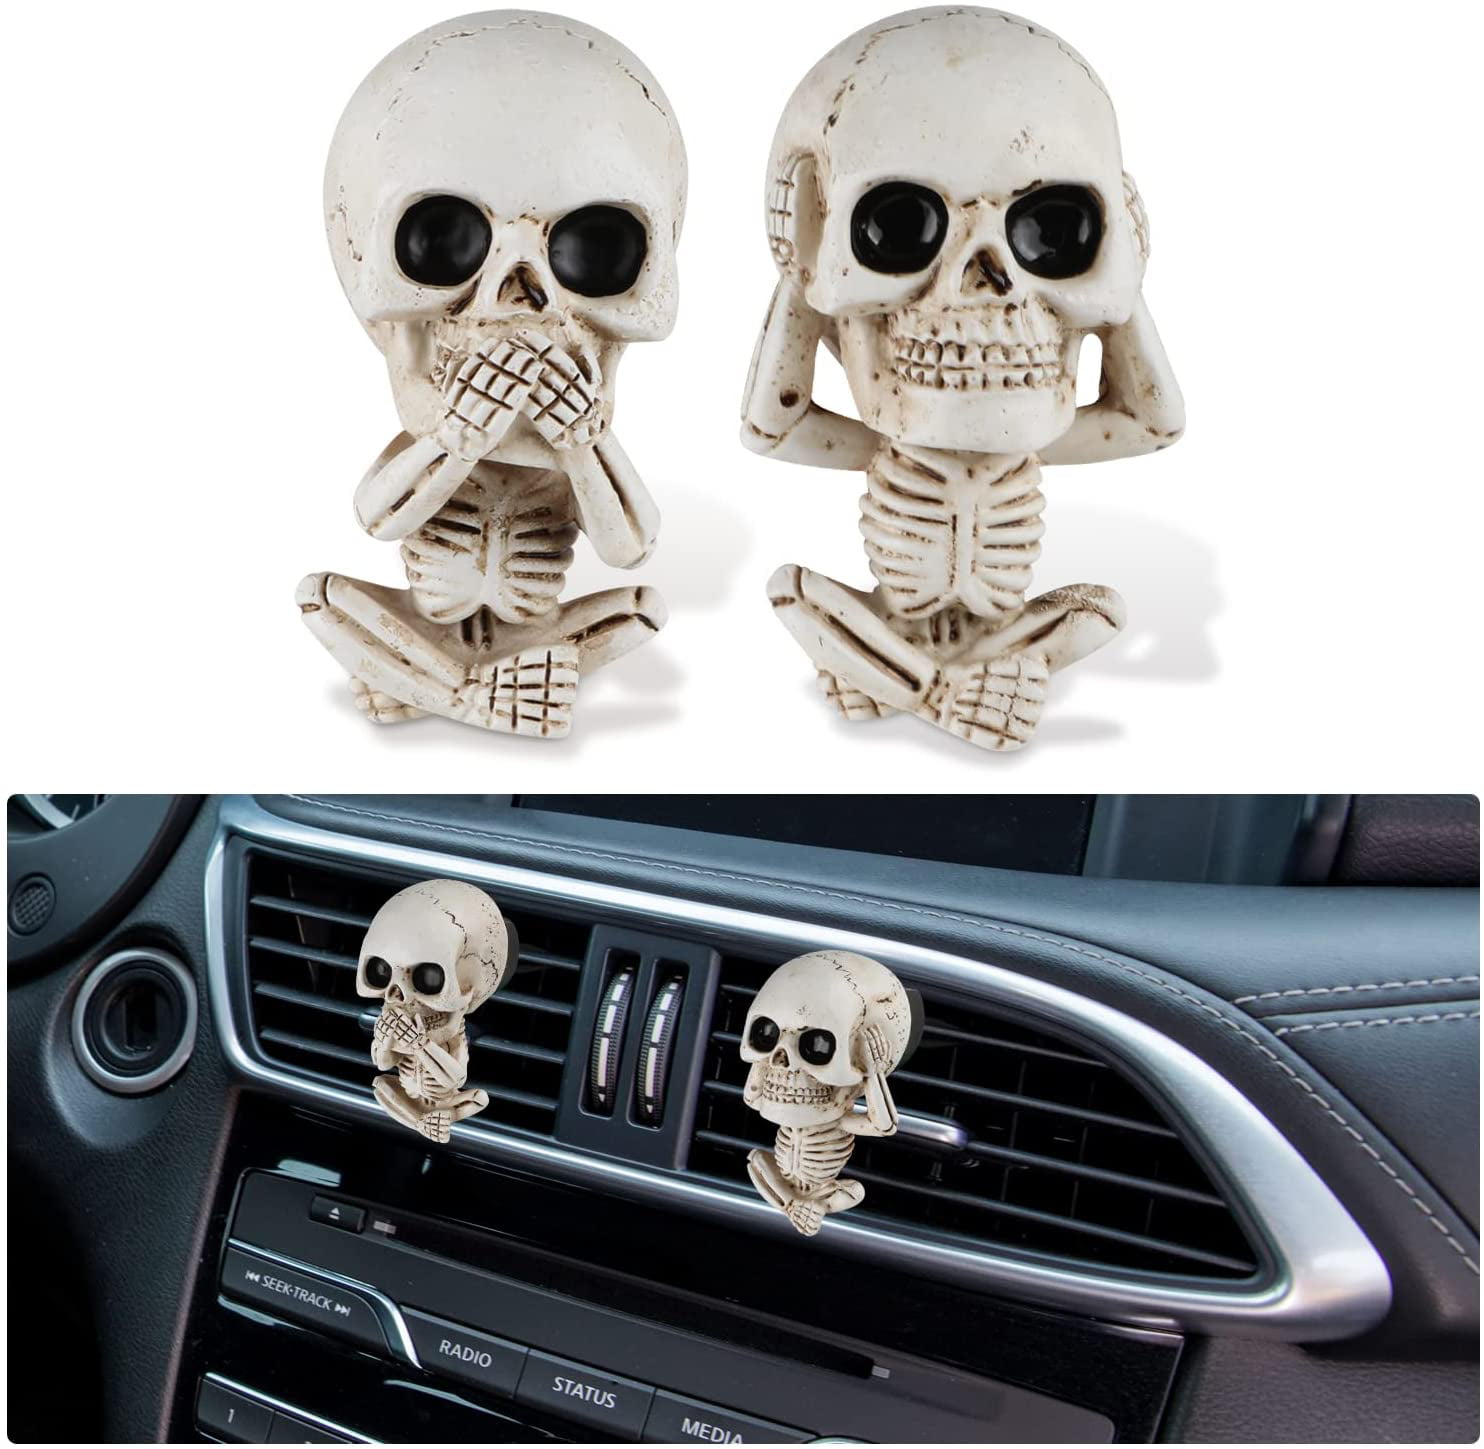 Cool Skull Car Decor for Car Truck Air Fresheners Vent Clips, Car Scent  Freshener Things, Goth Automotive Interior Aesthetic Decorations, Mens